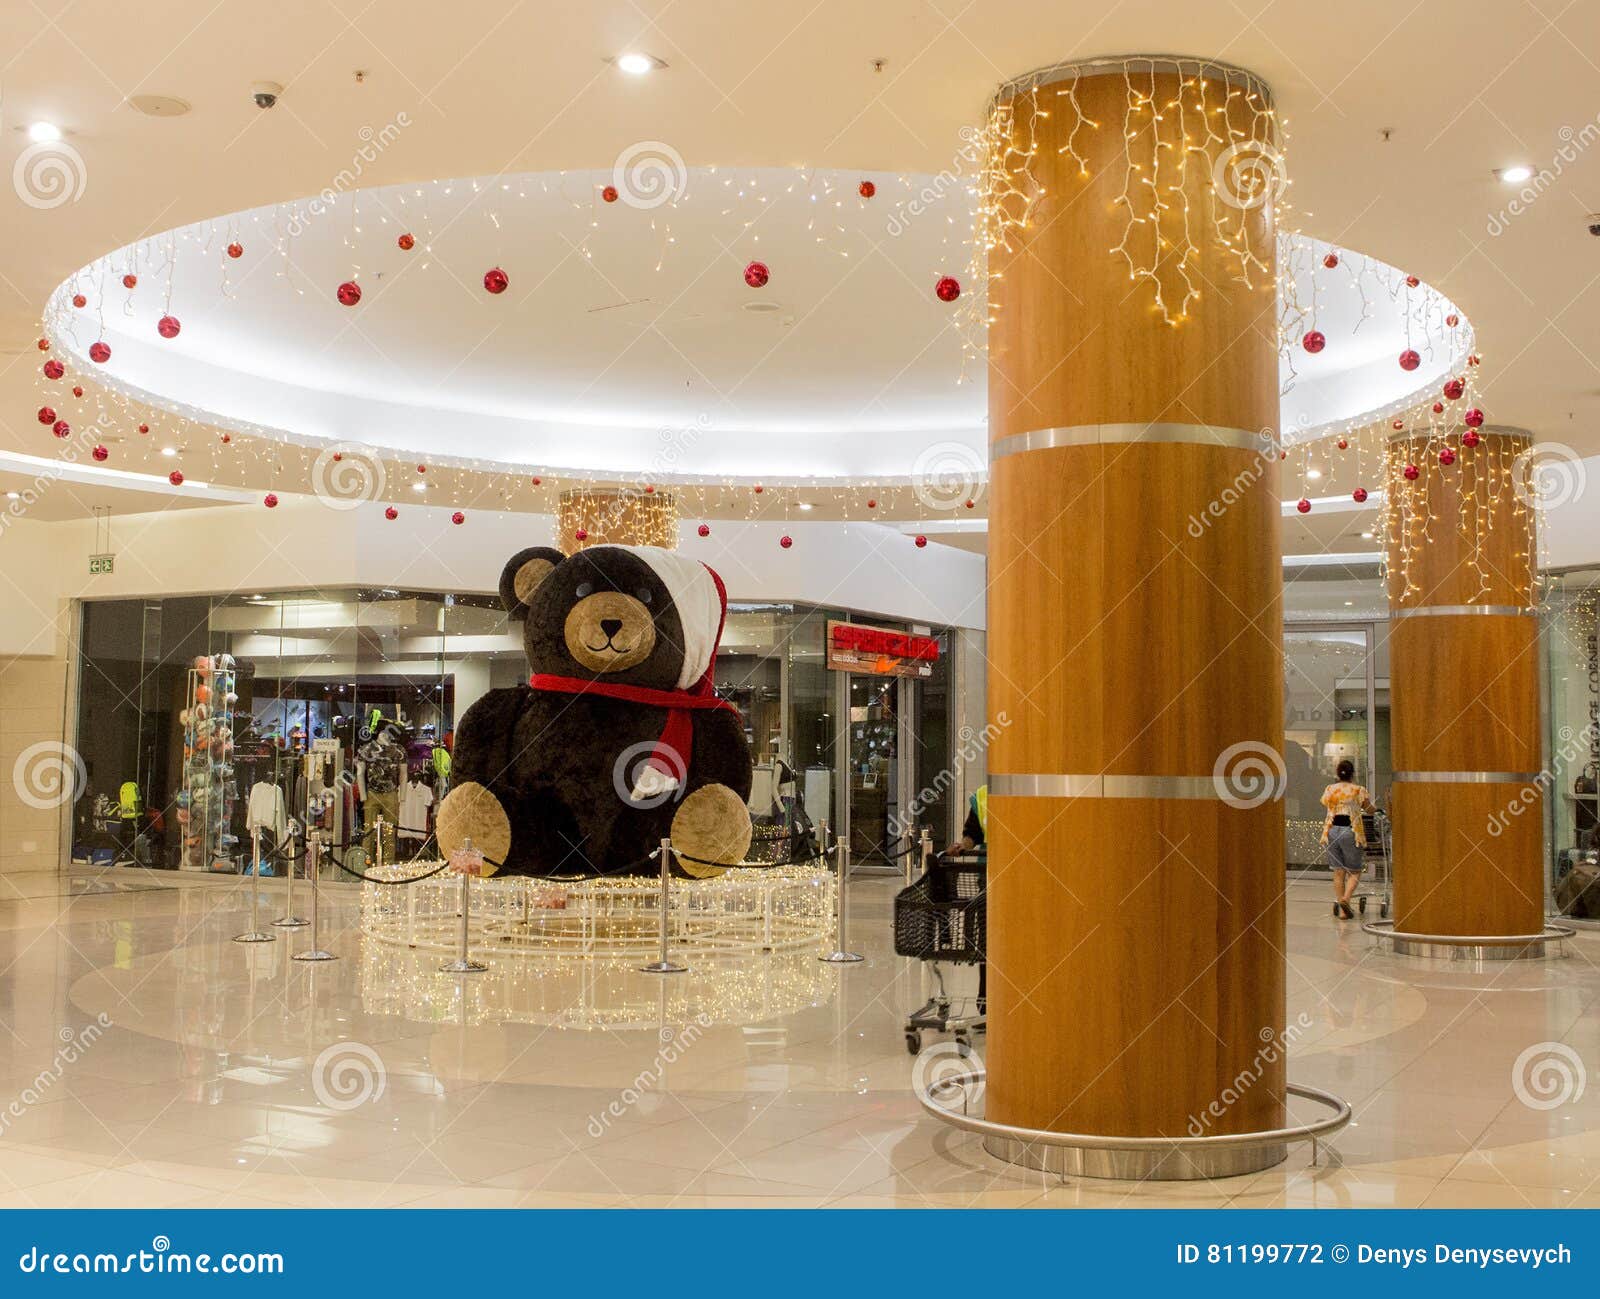  Christmas  Decoration  In Shopping Mall Editorial Photo 